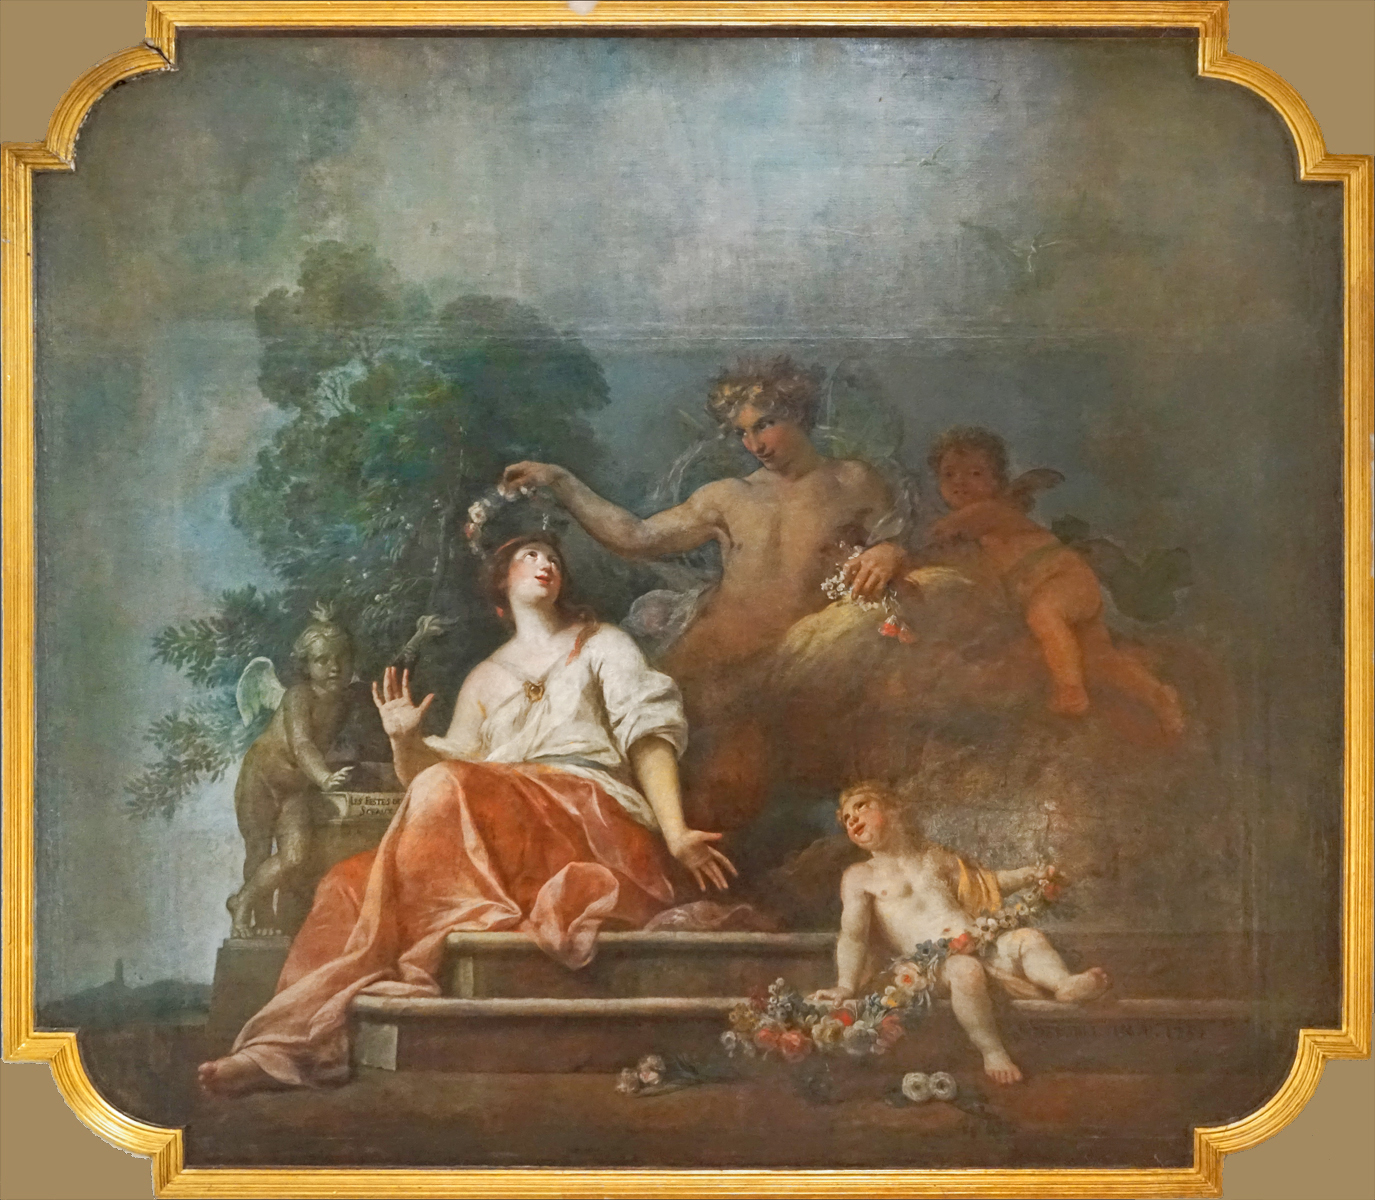 painting on wall of a woman laying down and man holding two cups